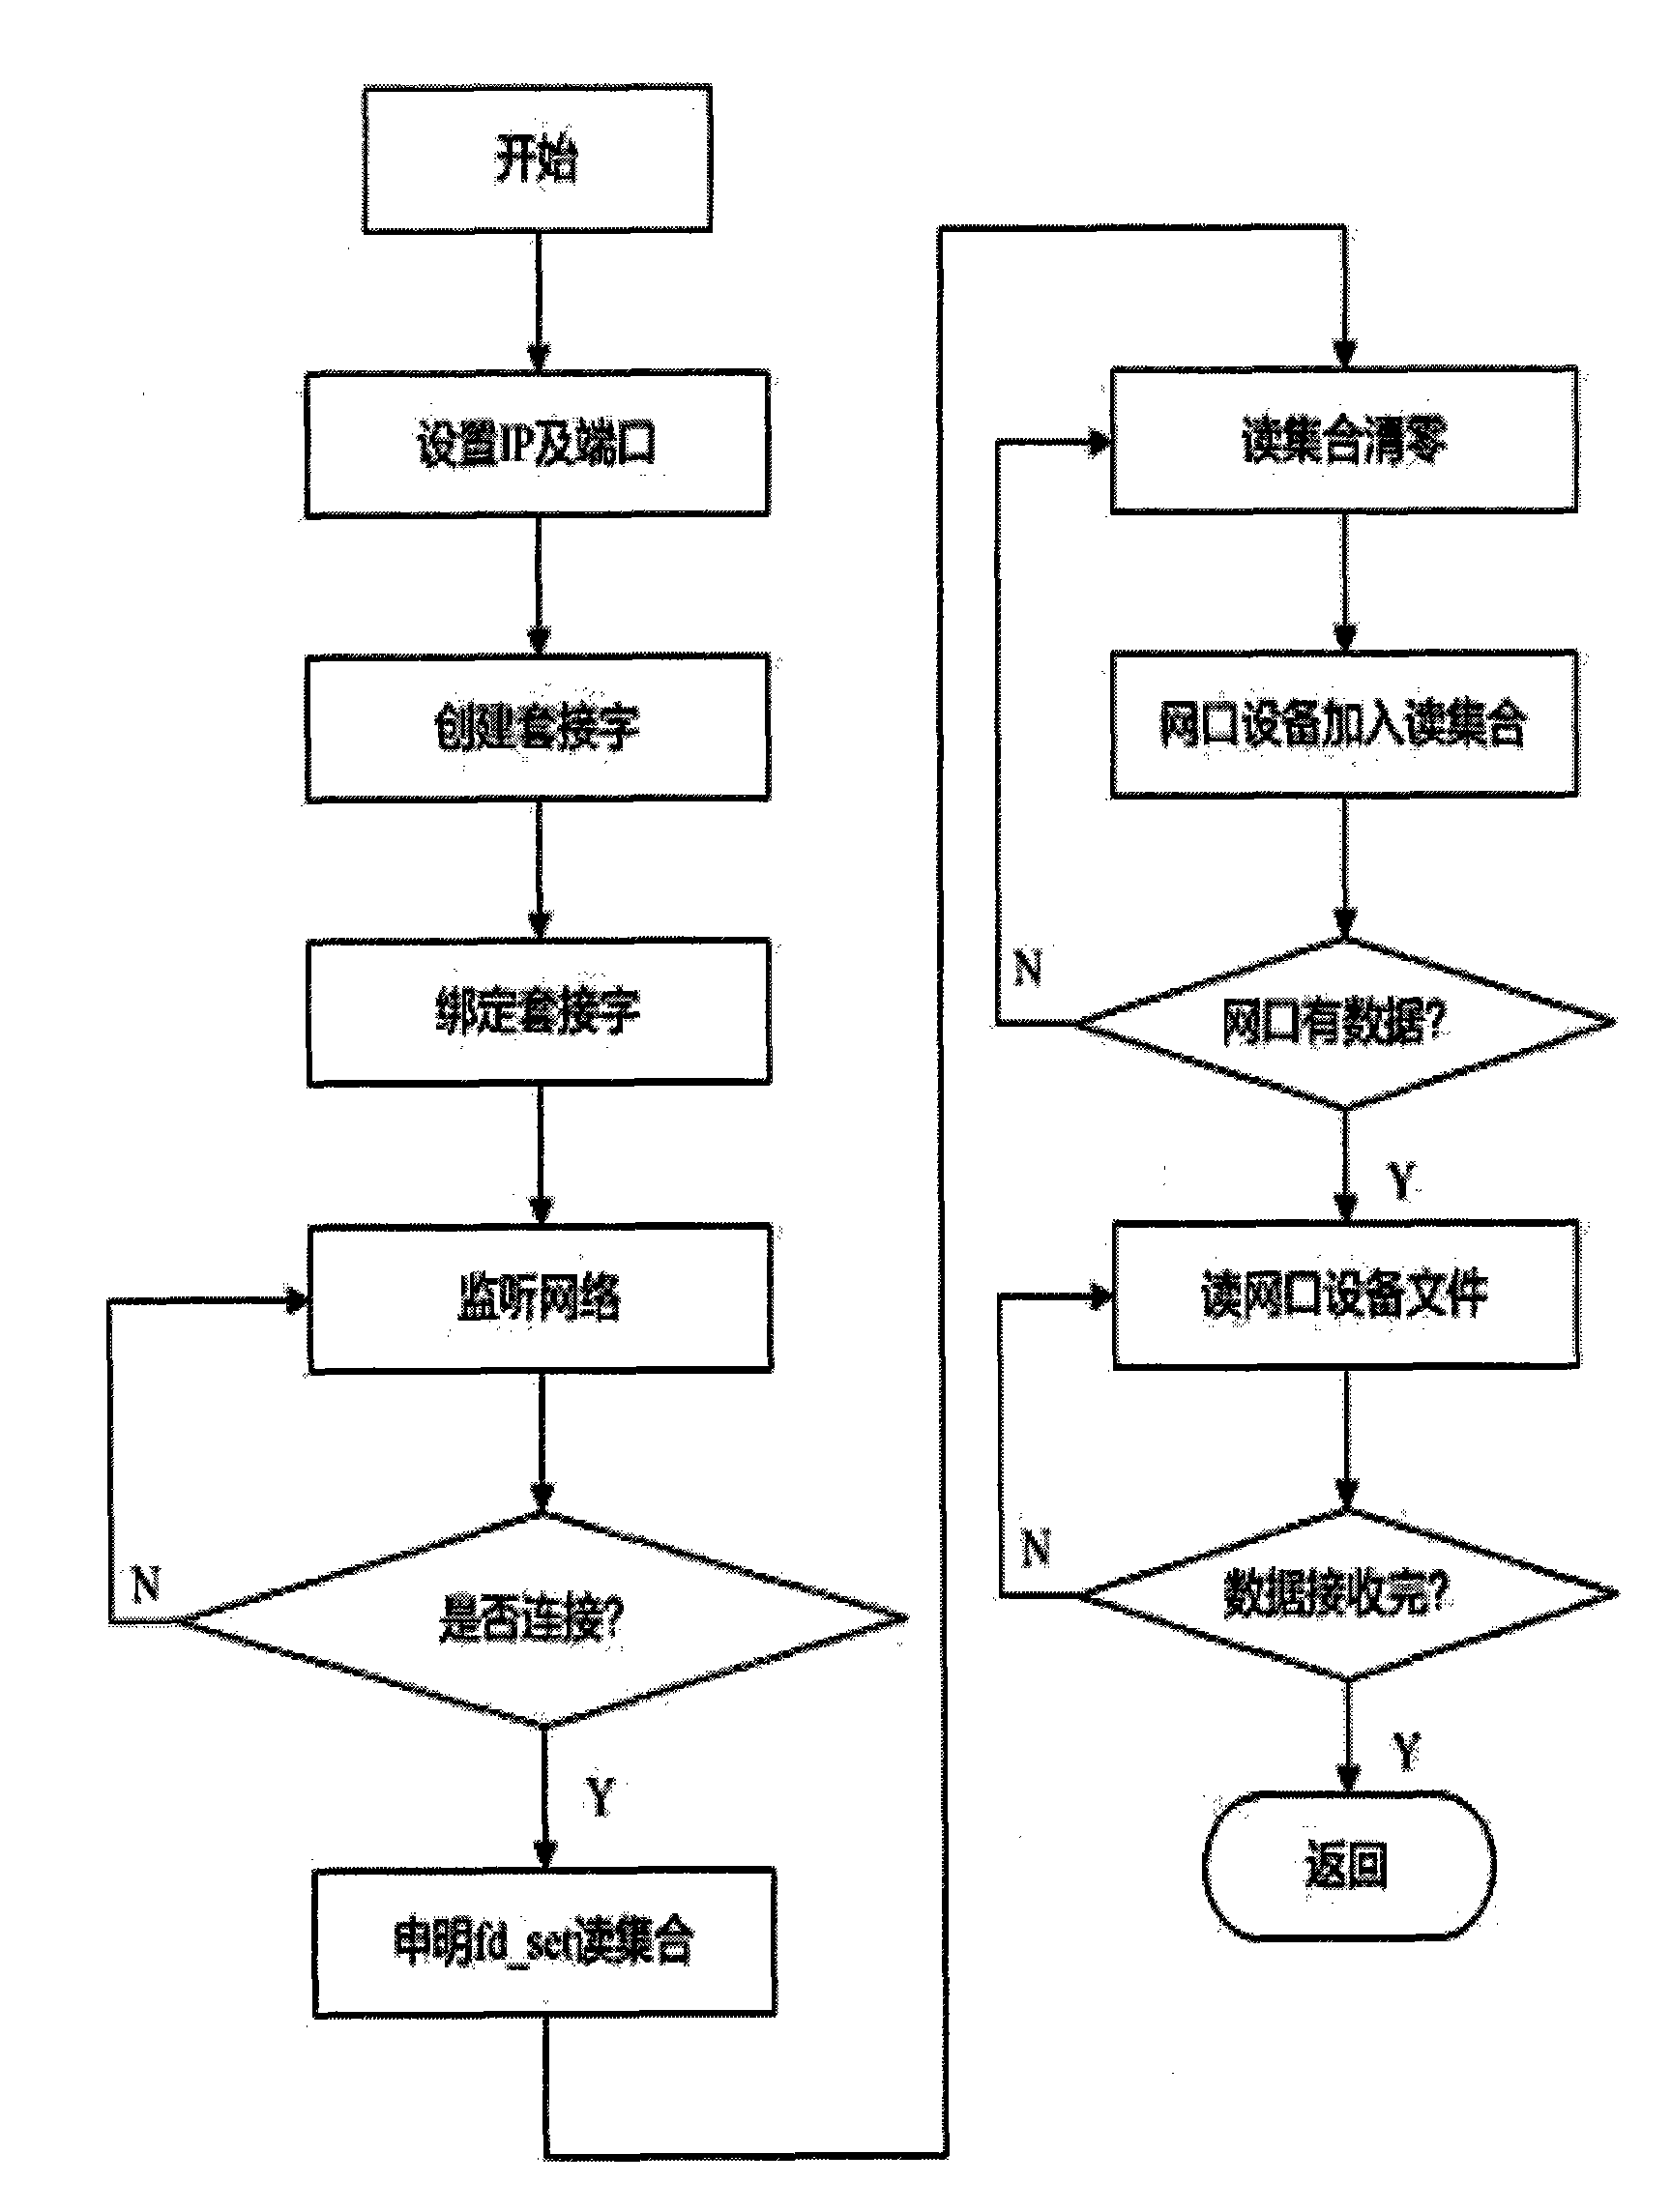 Low-voltage power line bandwidth carrier concentrator